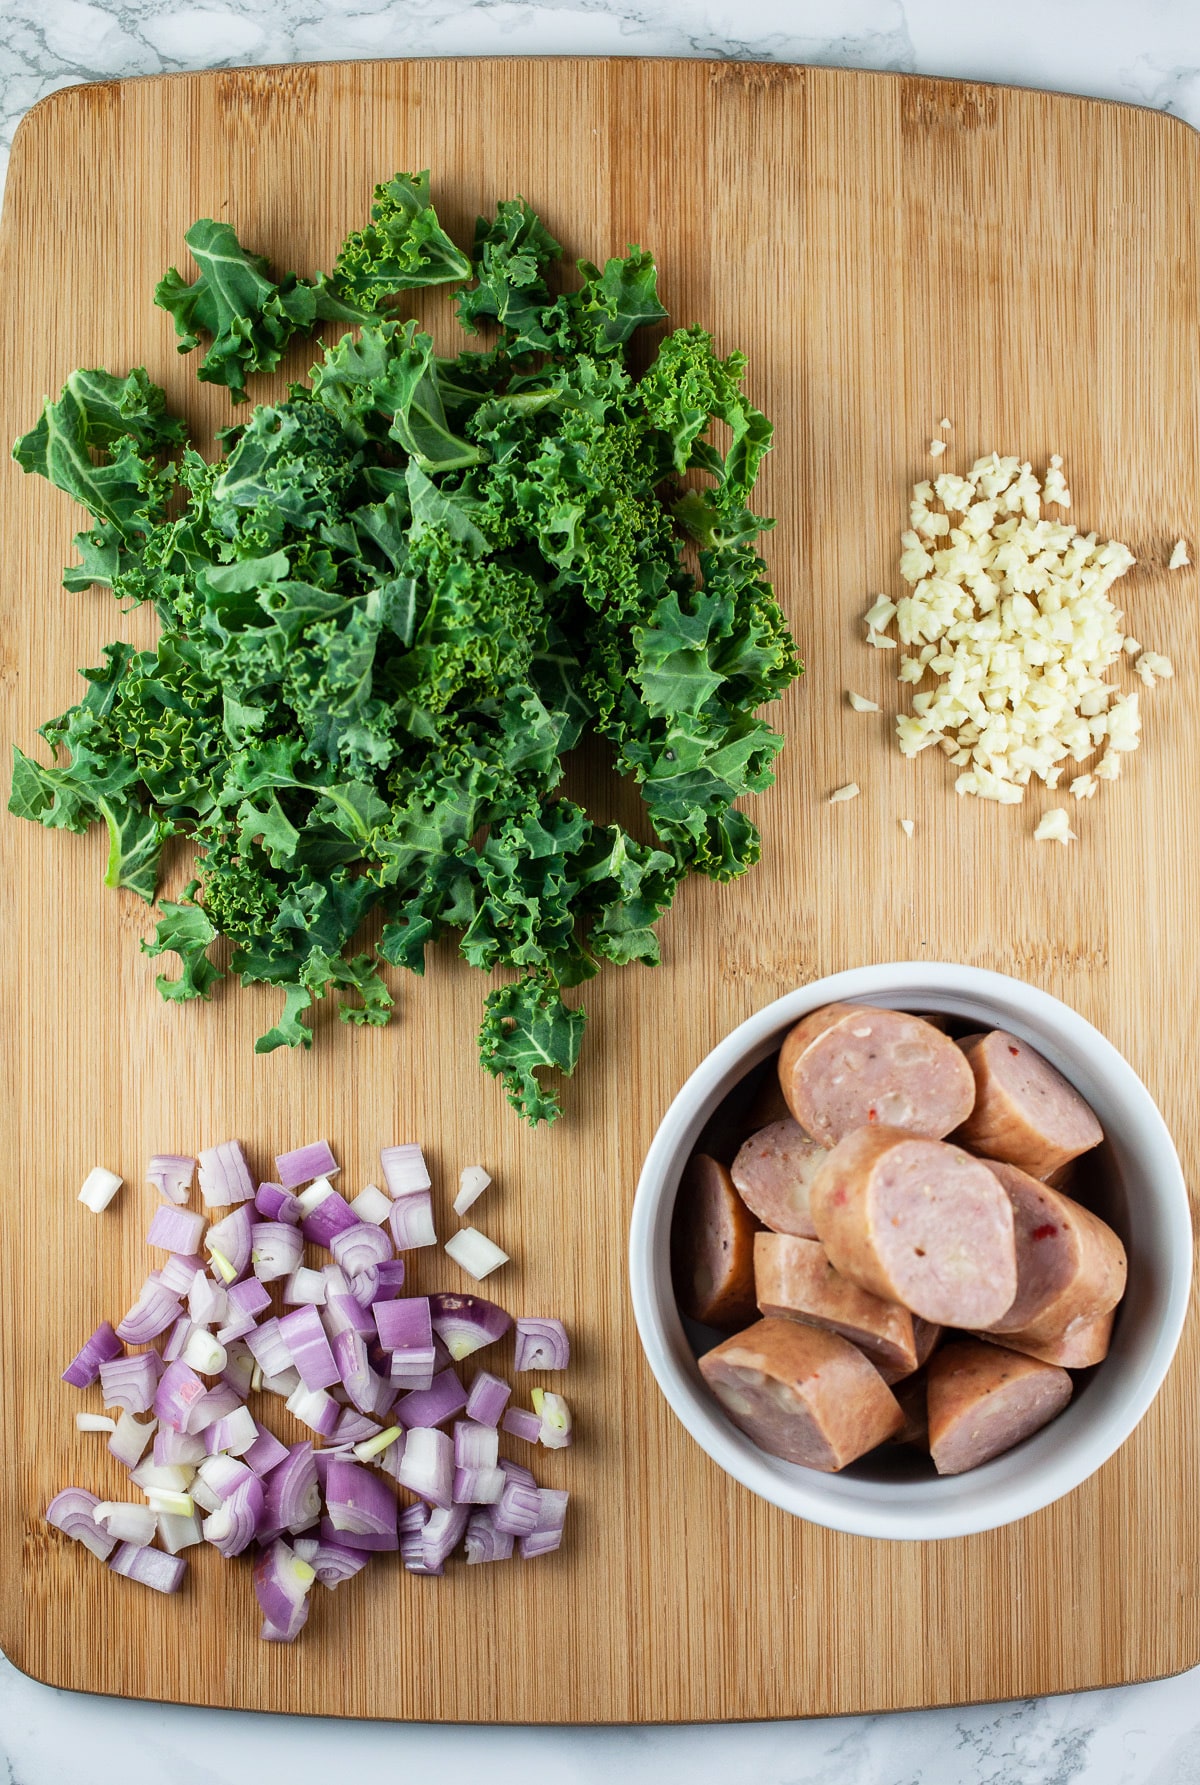 Minced garlic, shallots, and kale and sliced chicken sausages on wooden cutting board.